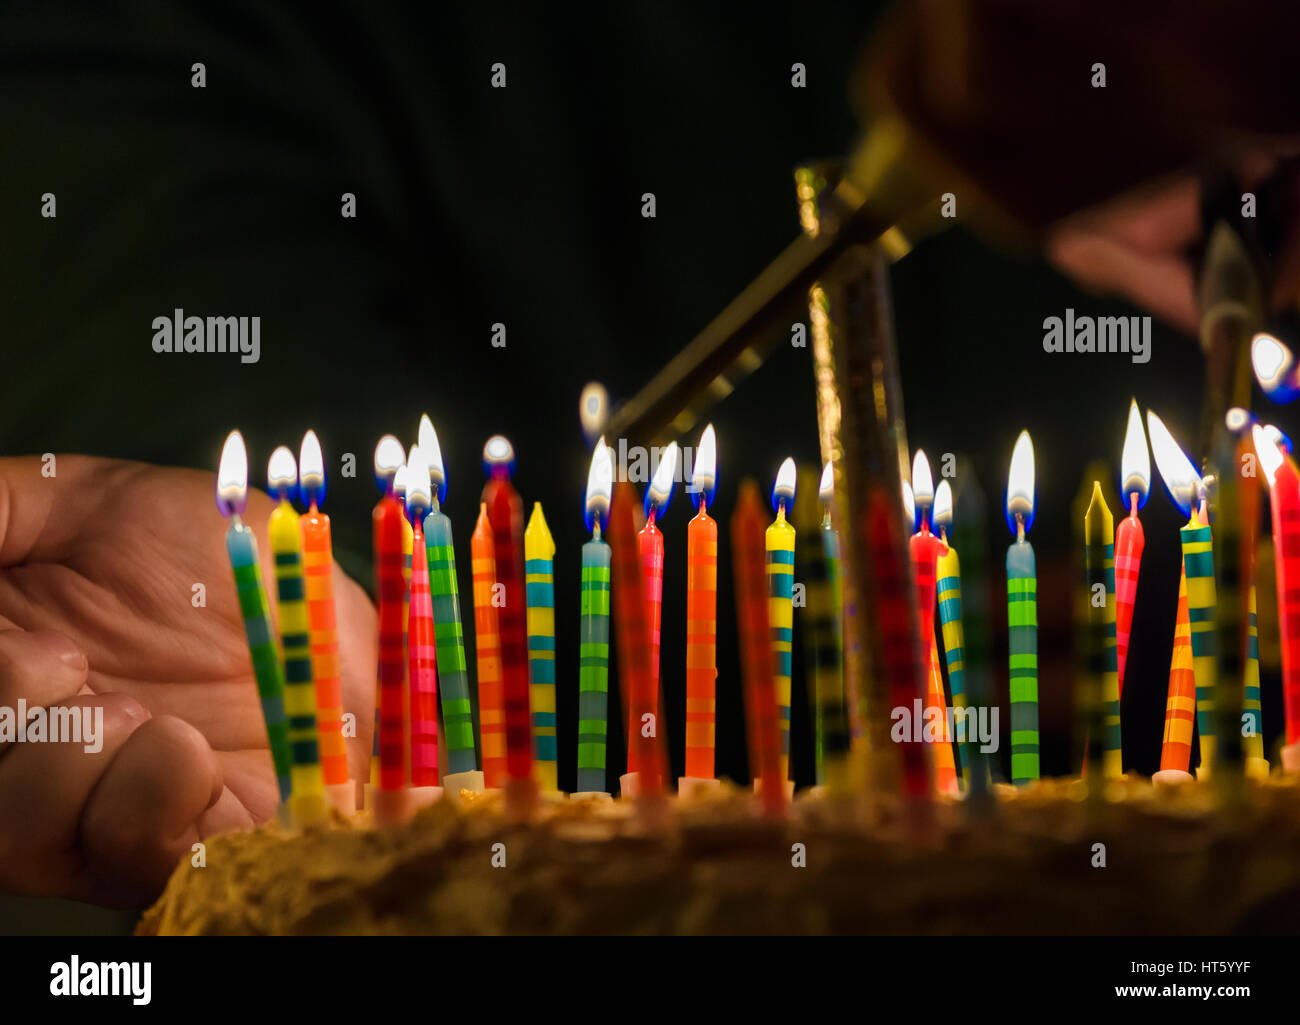 Birthday celebration with candles on a cake. Stock Photo